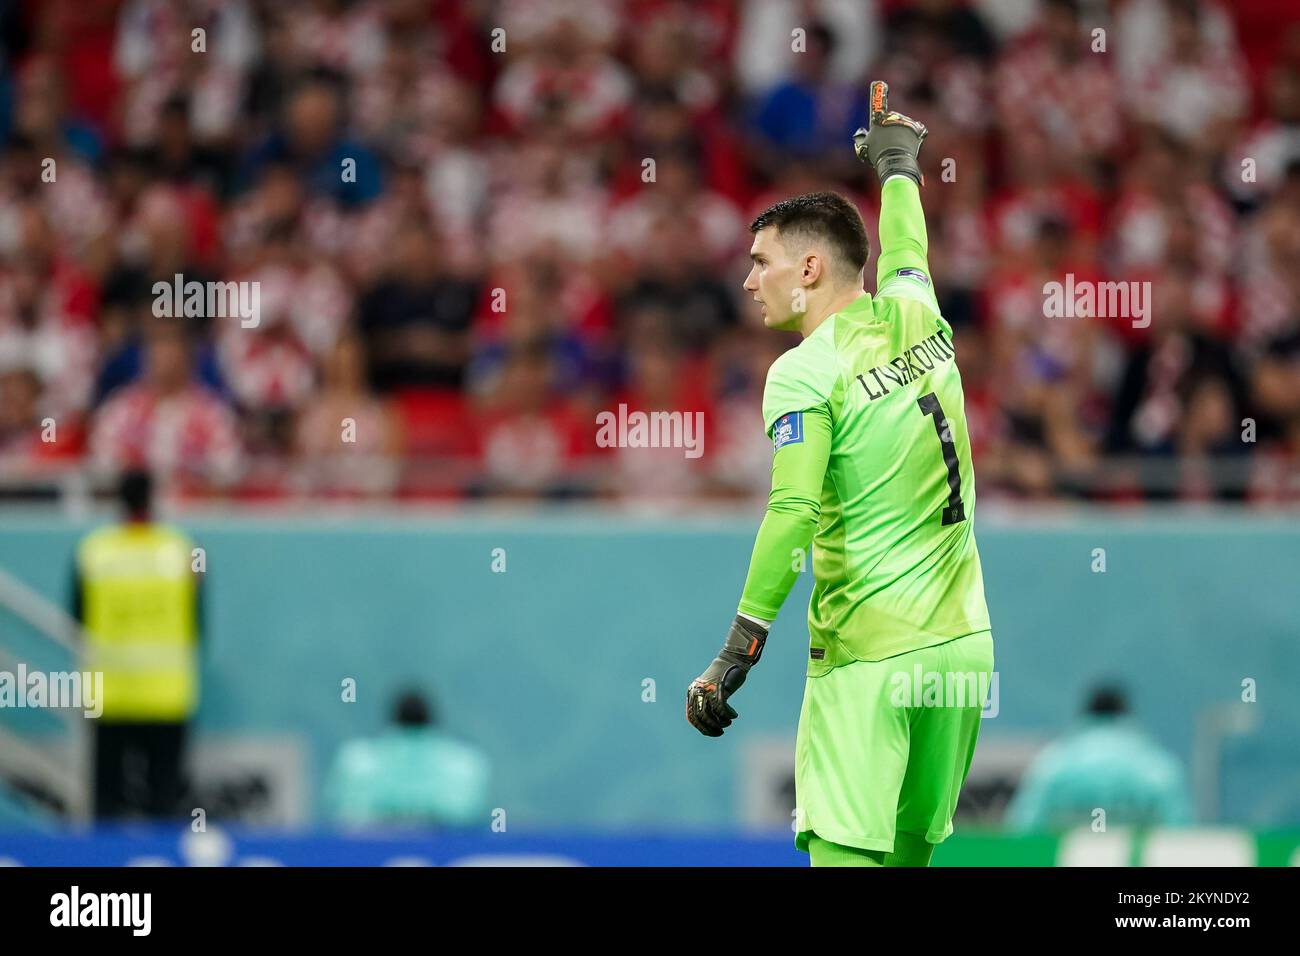 DOHA, QATAR - DECEMBER 1: Player of Croatia Dominik Livakovic gives instruction to the team during the FIFA World Cup Qatar 2022 group F match between Croatia and Belgium at Ahmad Bin Ali Stadium on December 1, 2022 in Doha, Qatar. (Photo by Florencia Tan Jun/PxImages) Stock Photo